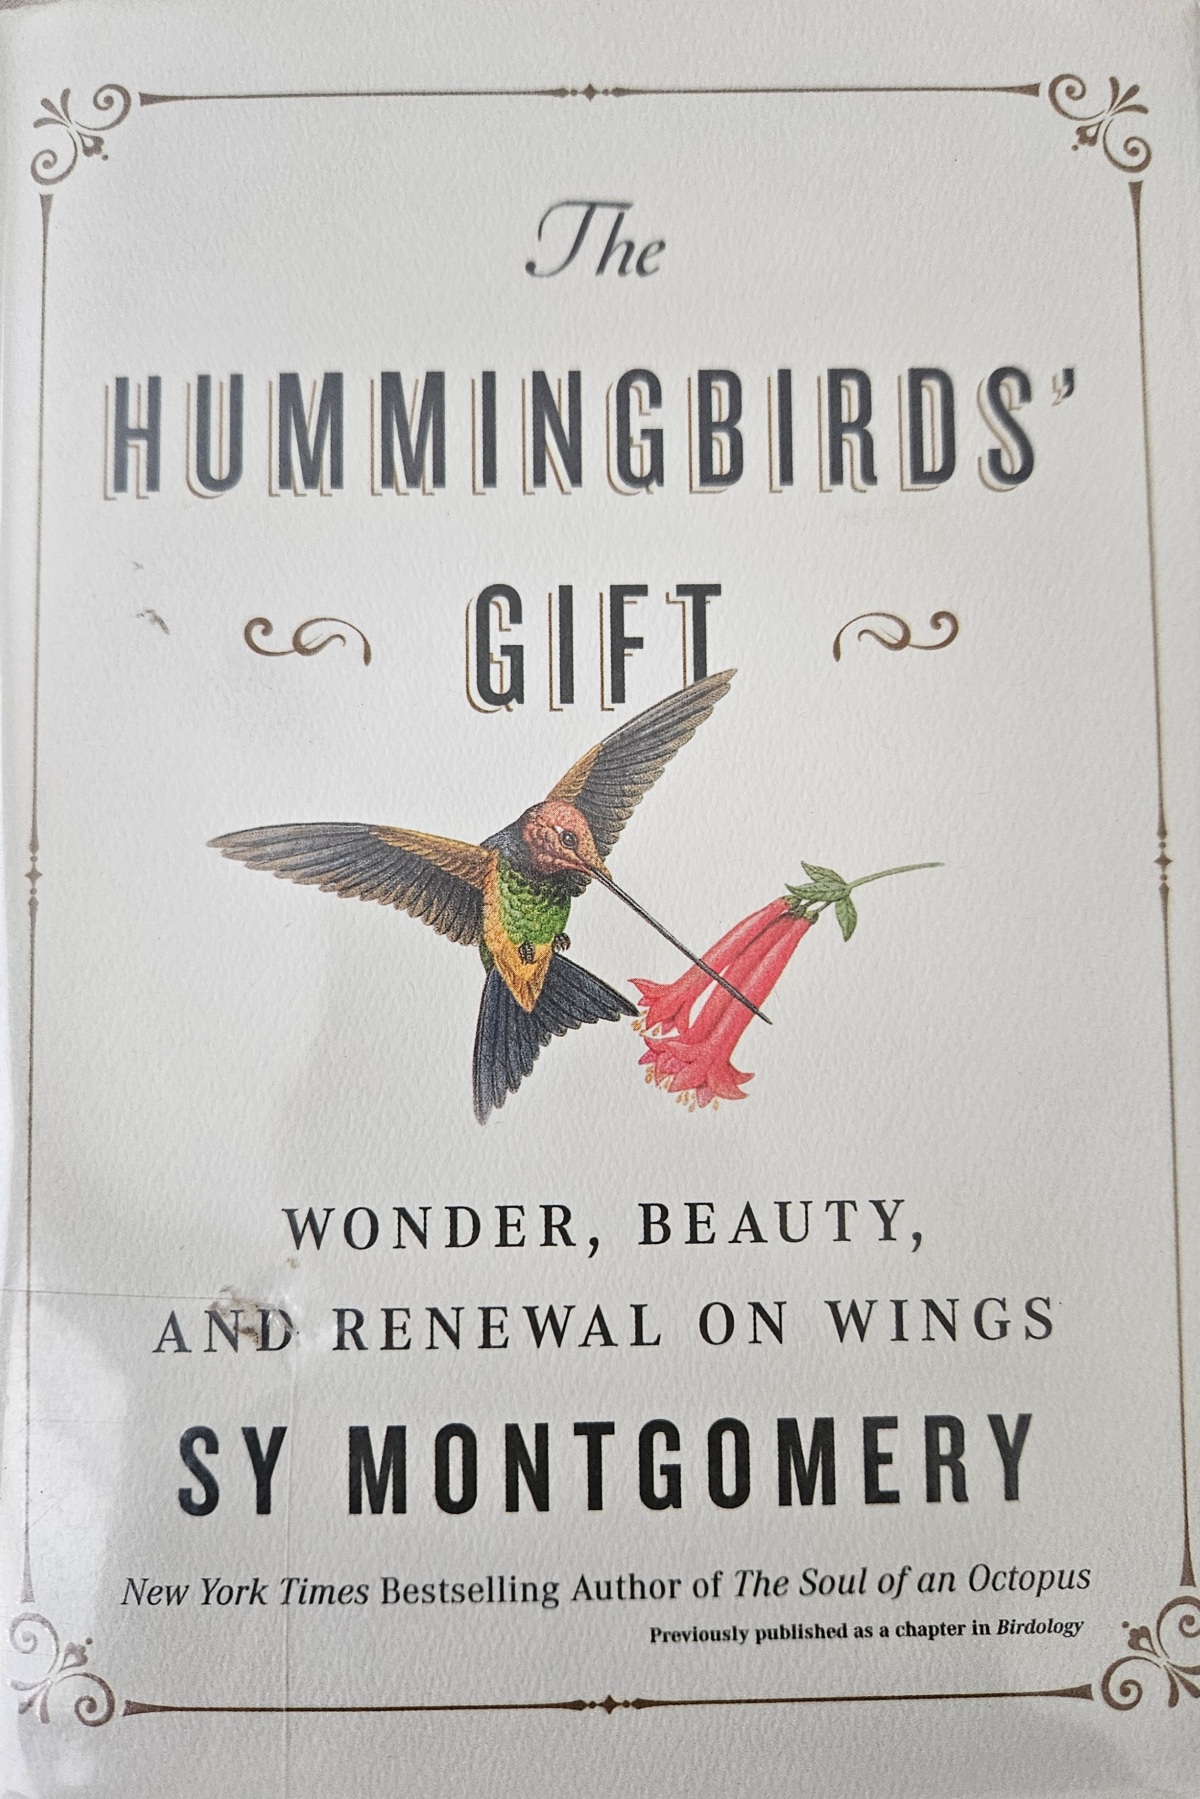 Book List: The Hummingbirds’ Gift by Sy Montgomery